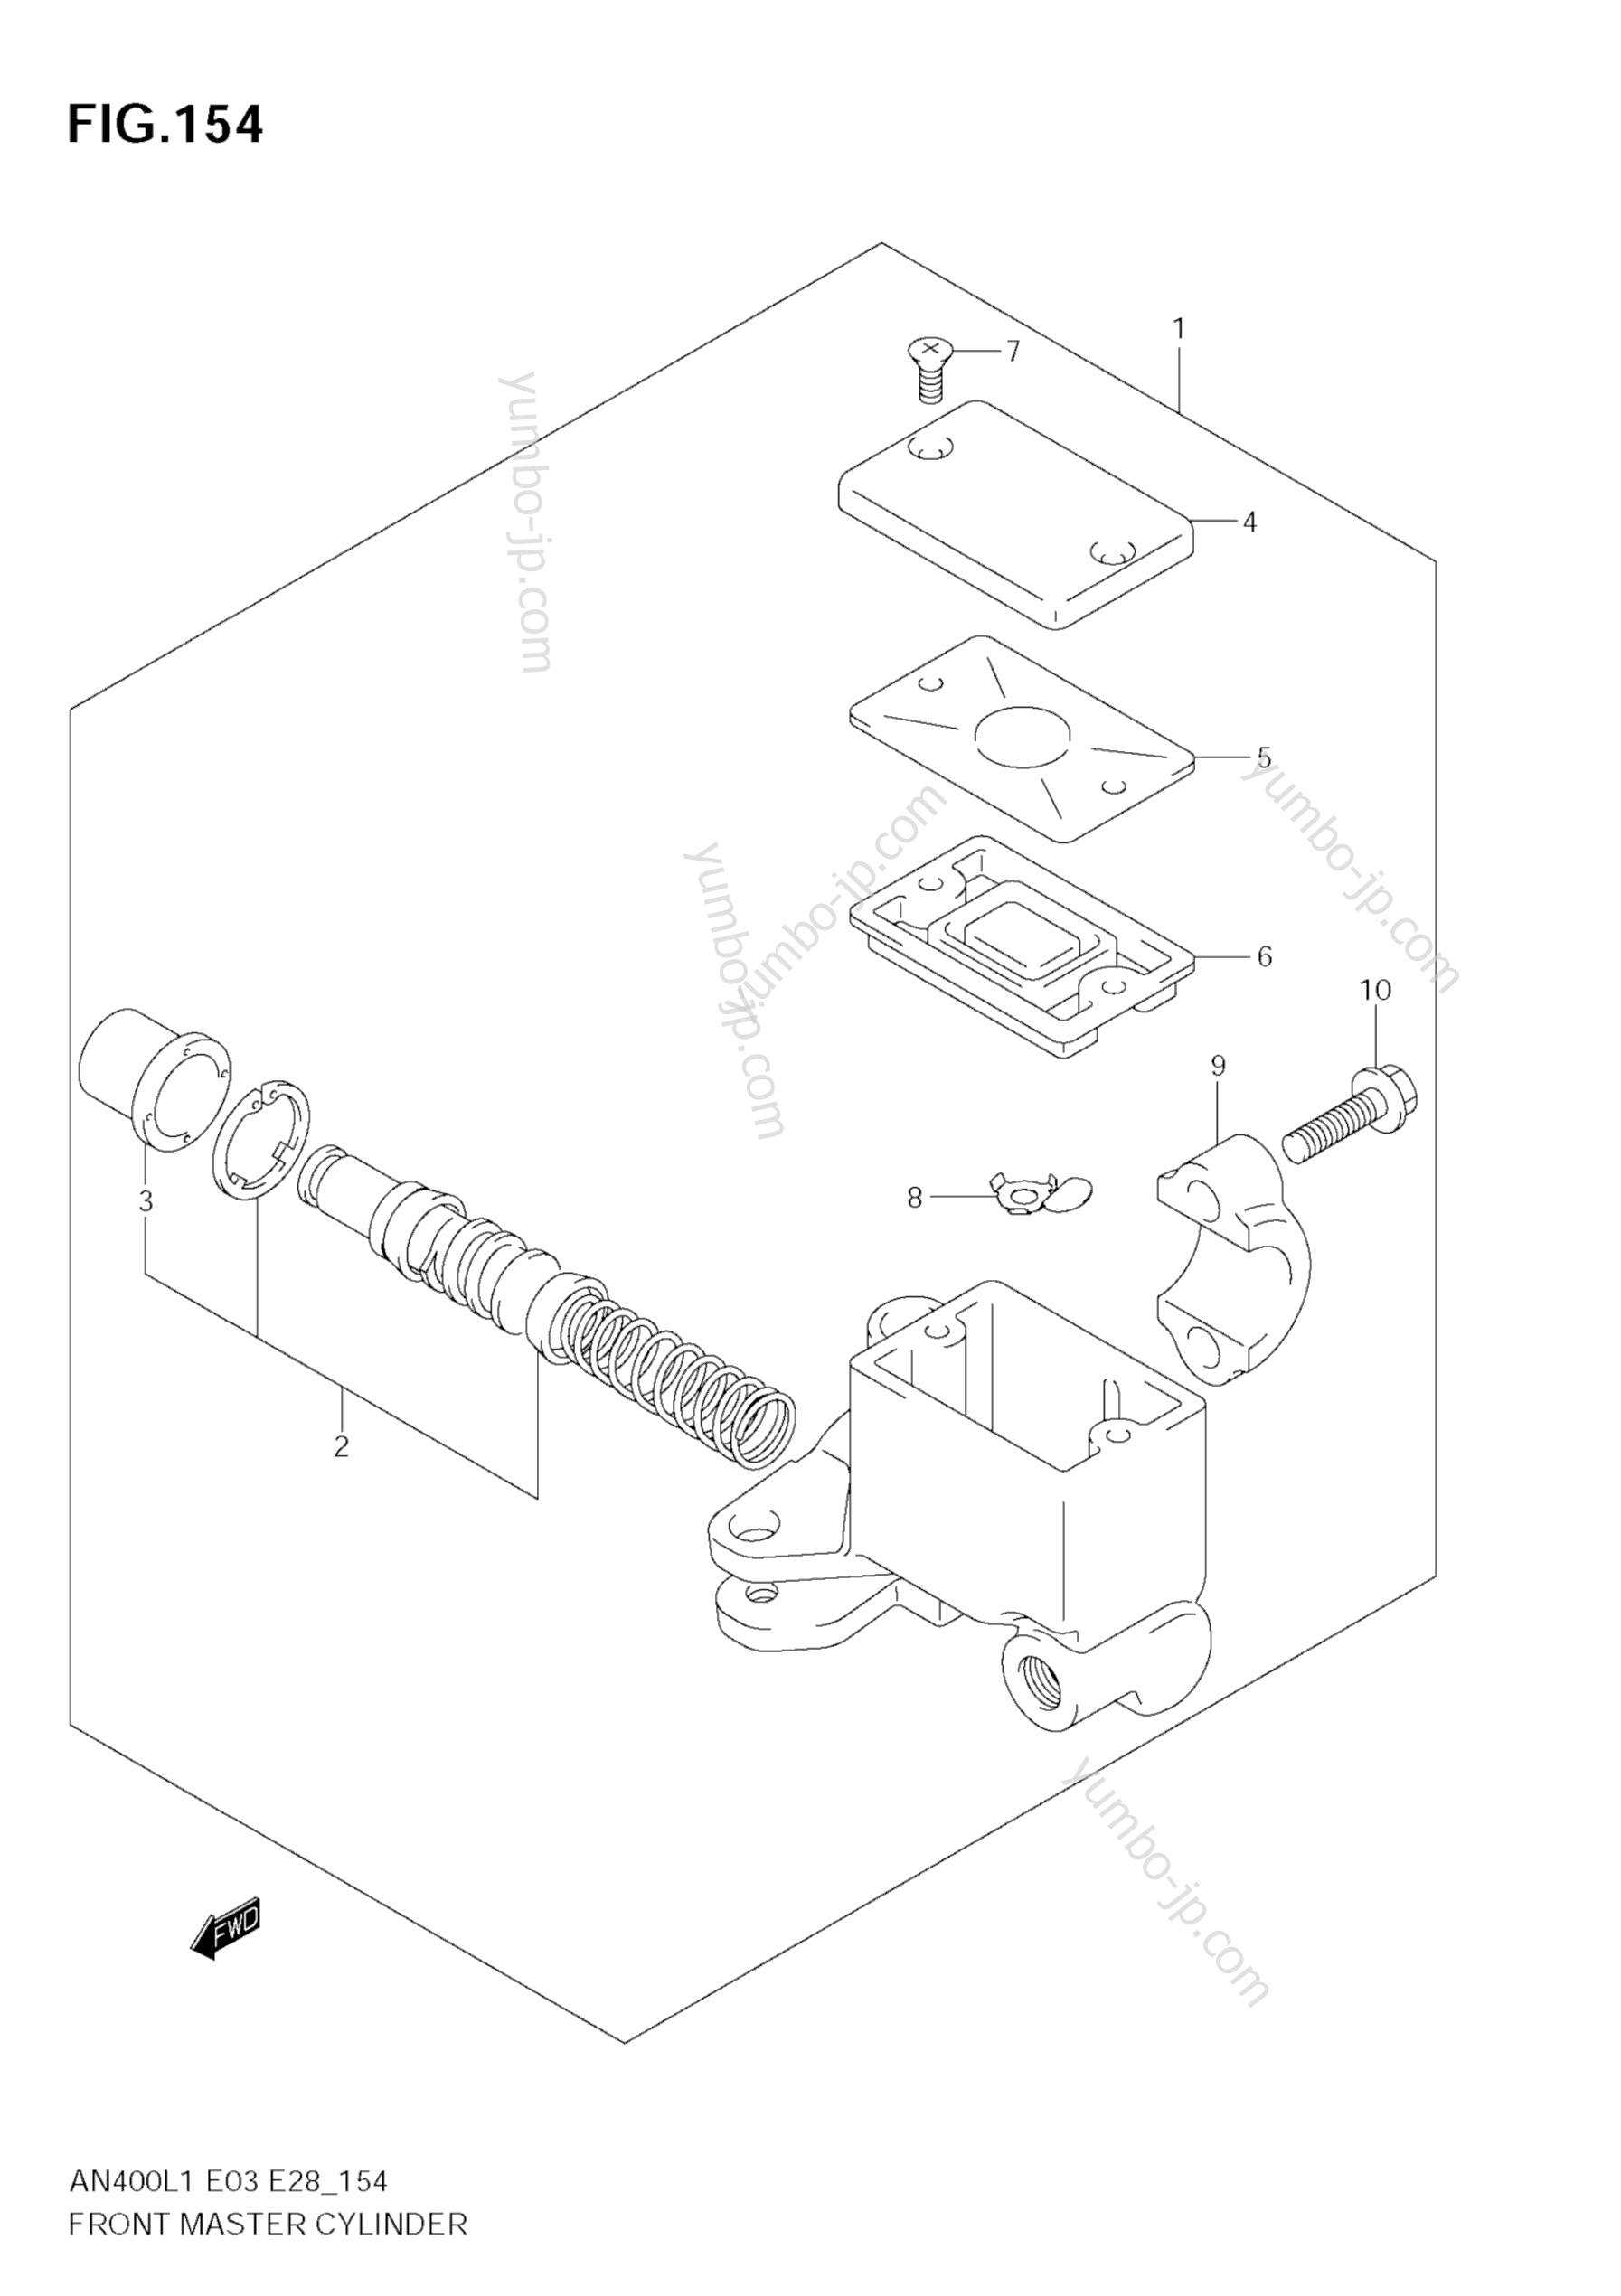 FRONT MASTER CYLINDER (AN400 L1 E33) for scooters SUZUKI Burgman (AN400) 2011 year